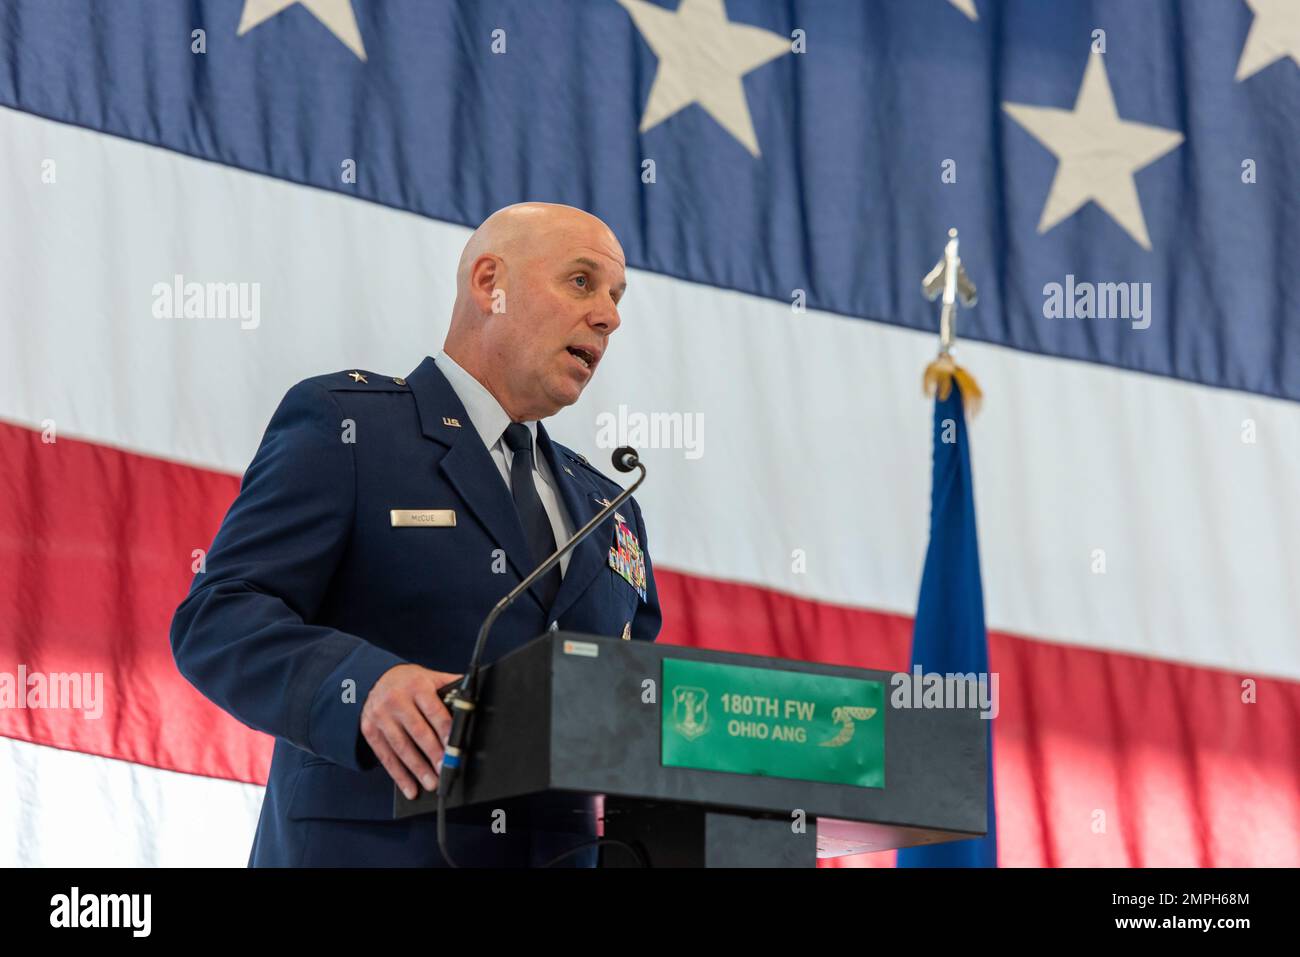 U.S. Air Force Brig. Gen. Gary McCue, Deputy Assistant Adjutant General for Air, Ohio National Guard,, gives remarks during a Change of Command ceremony at the Ohio National Guard’s 180th Fighter Wing in Swanton, Ohio, Oct. 15, 2022. During the ceremony, outgoing 180FW commander, U.S. Air Force Col. Michael DiDio, relinquished command to Col. Chad Holesko. Stock Photo